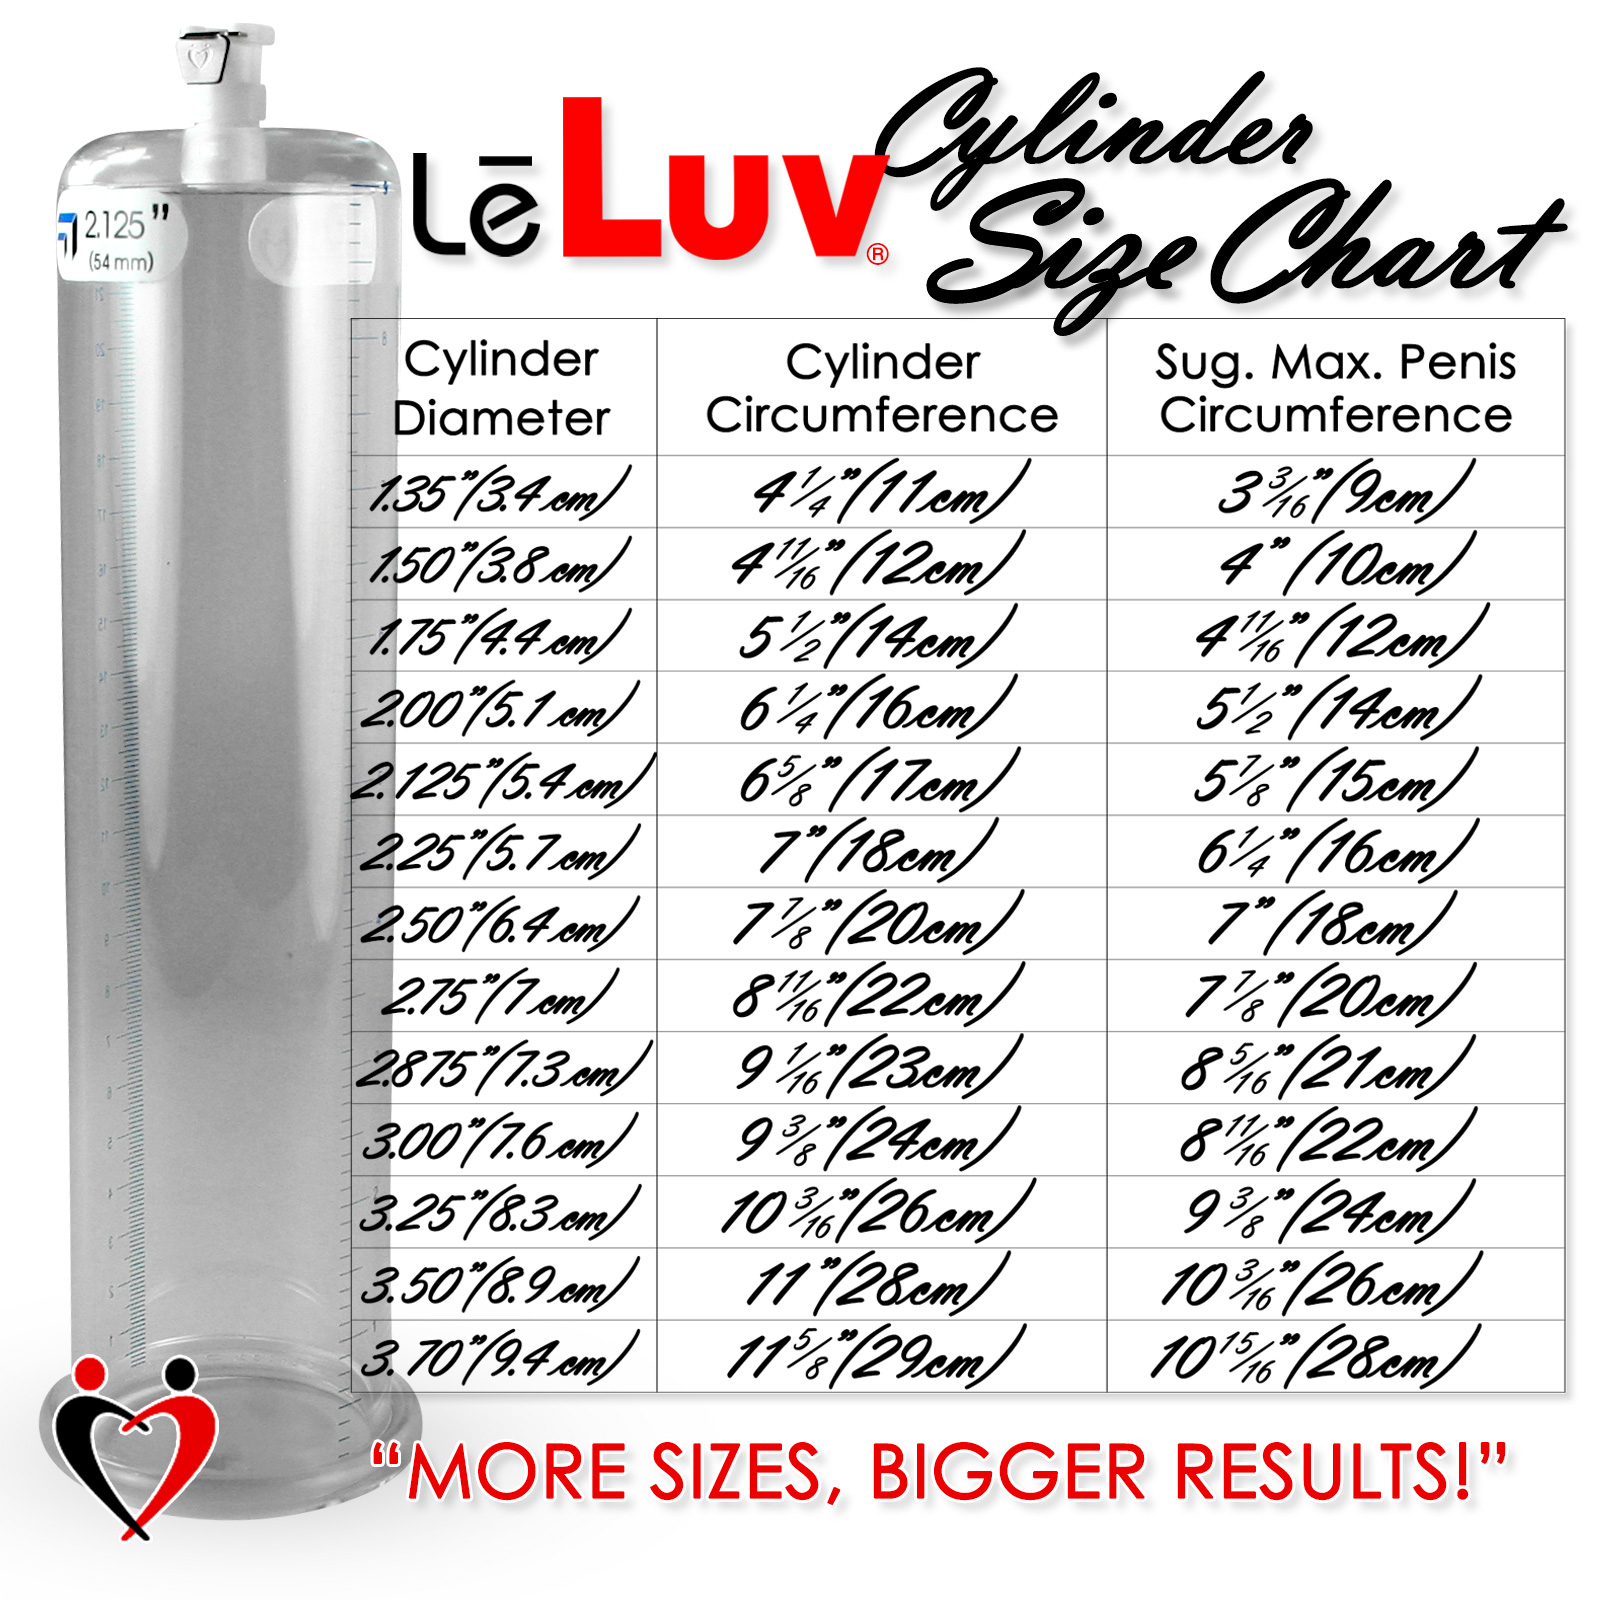 LeLuv 2.875 inch x 9 inch Vacuum Penis Pump Cylinder with 24 inch Blue Silicone Premium Hose and Fittings